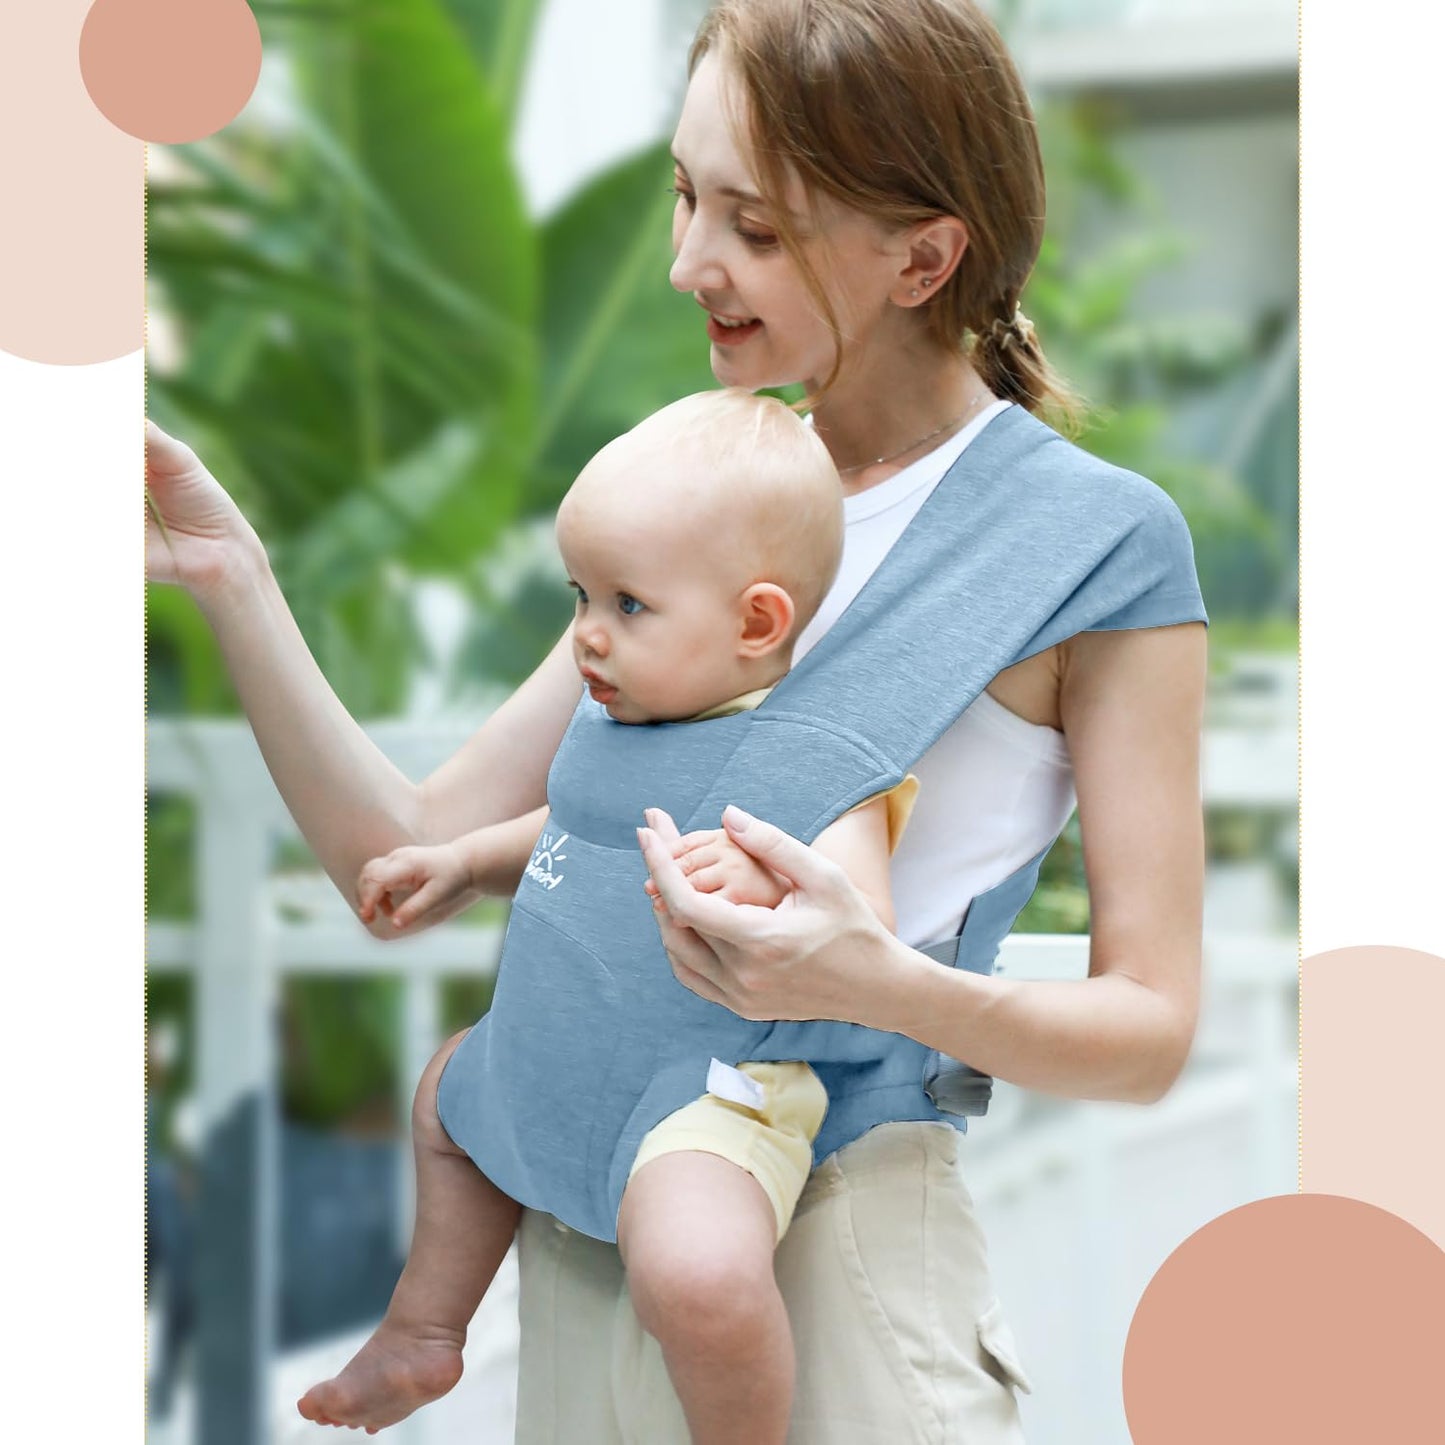 Newborn Carrier, MOMTORY Baby Carrier(7-25lbs), Cozy Baby Wrap Carrier